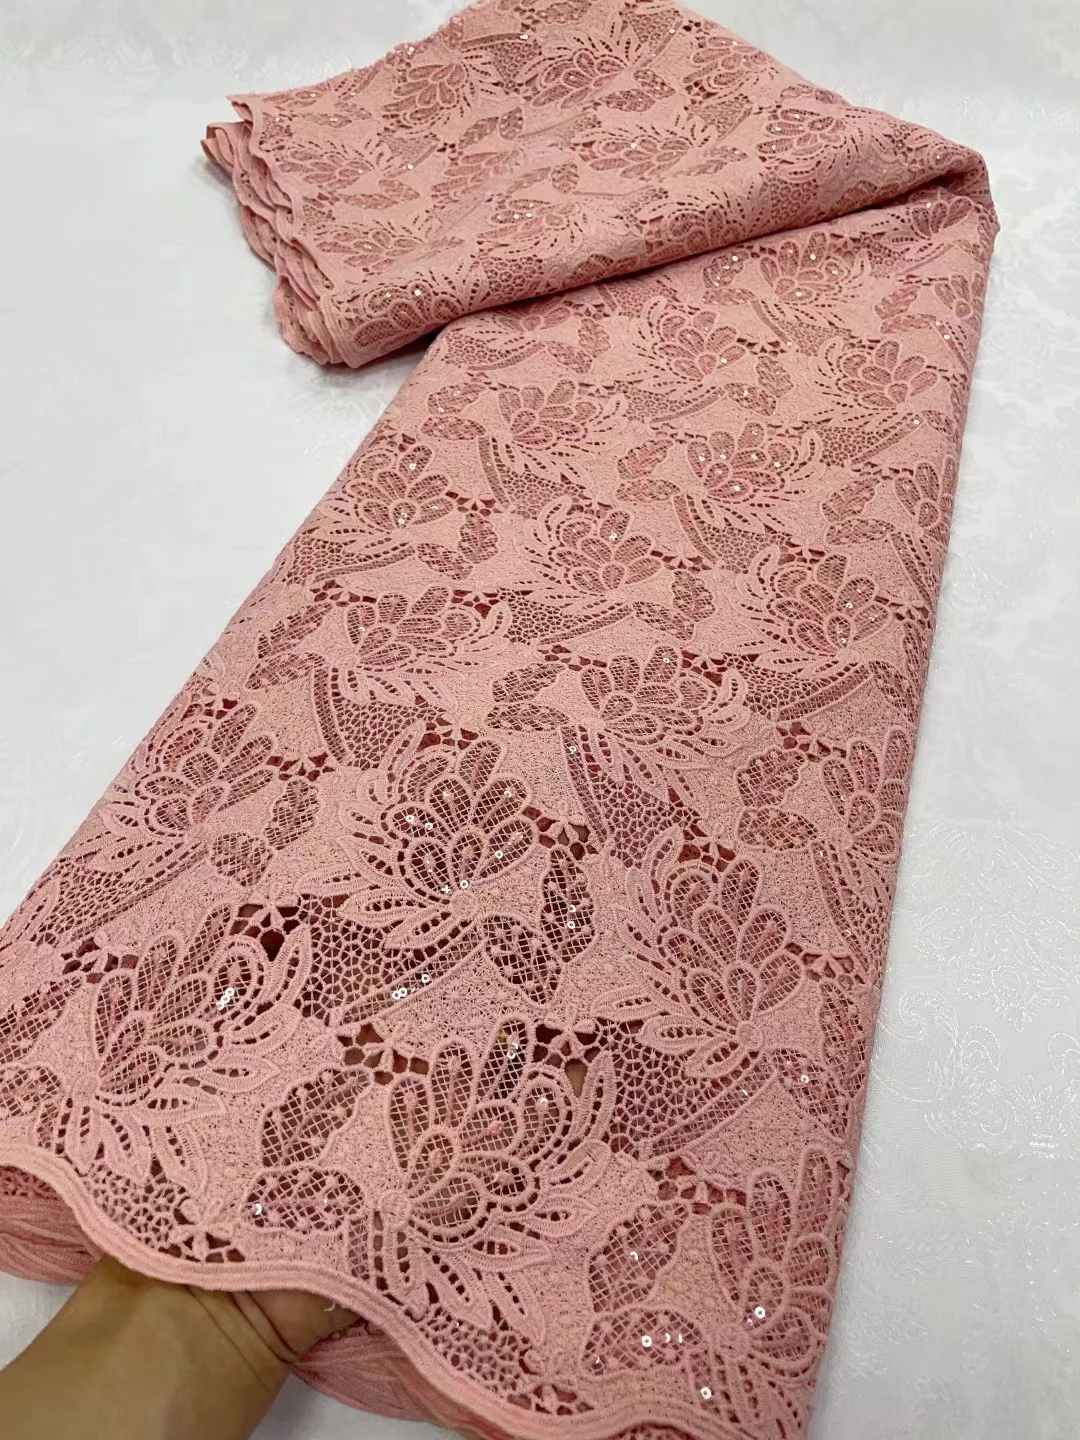 

Classical Peach Cord Lace Fabric African Bridal Guipure Lace Fabric For Wedding Dress Sewing Materials